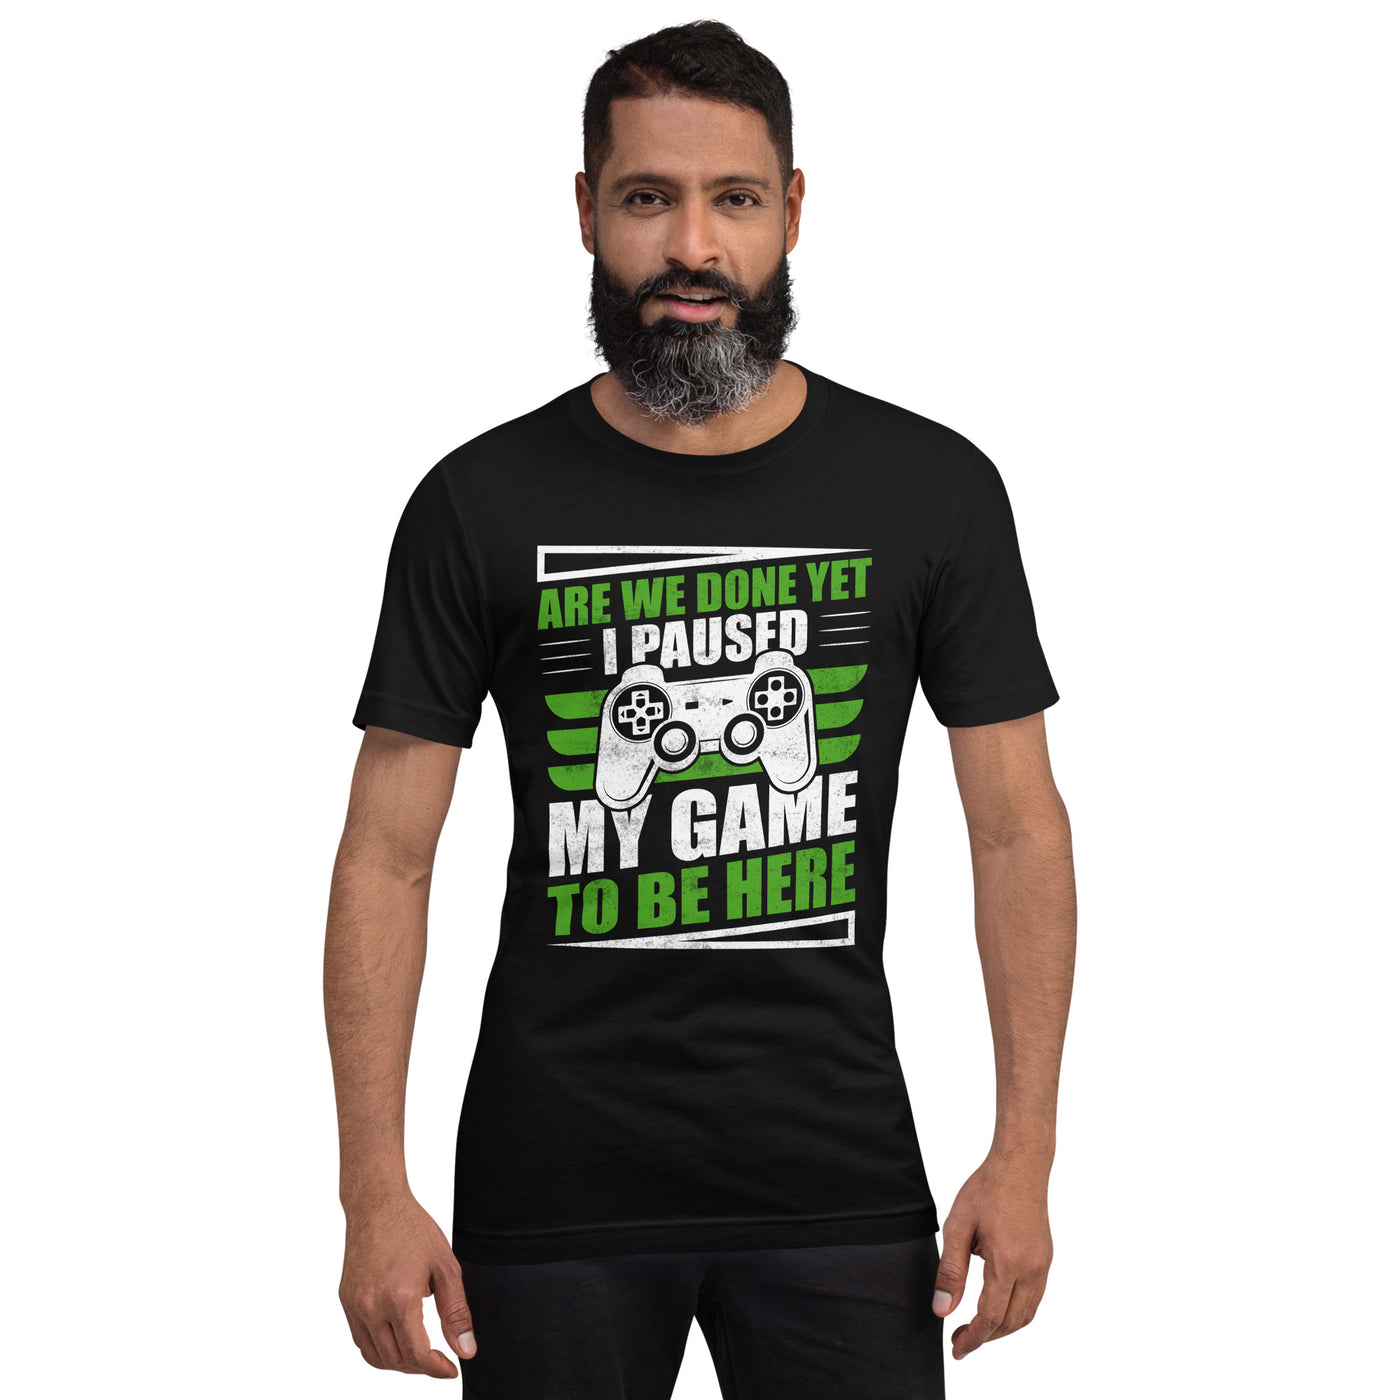 Are we Done yet, I Paused my Game to be here Unisex t-shirt